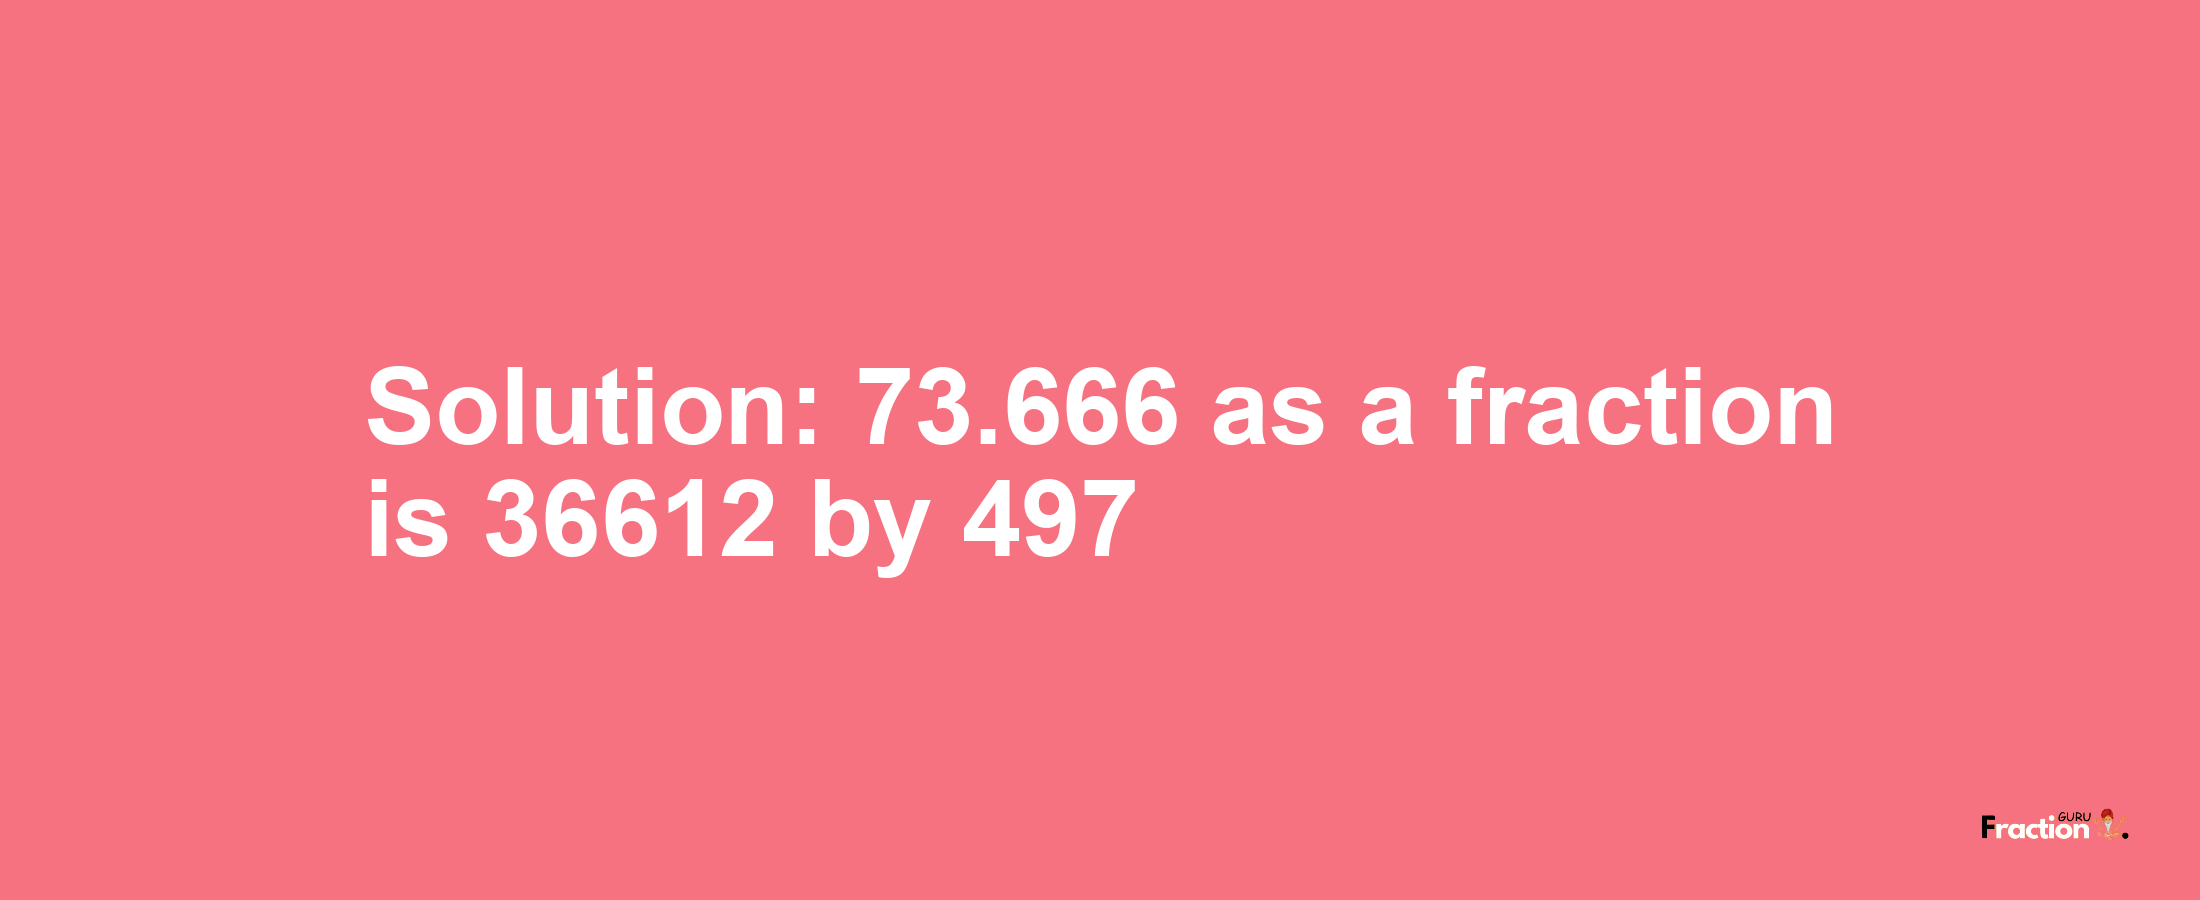 Solution:73.666 as a fraction is 36612/497